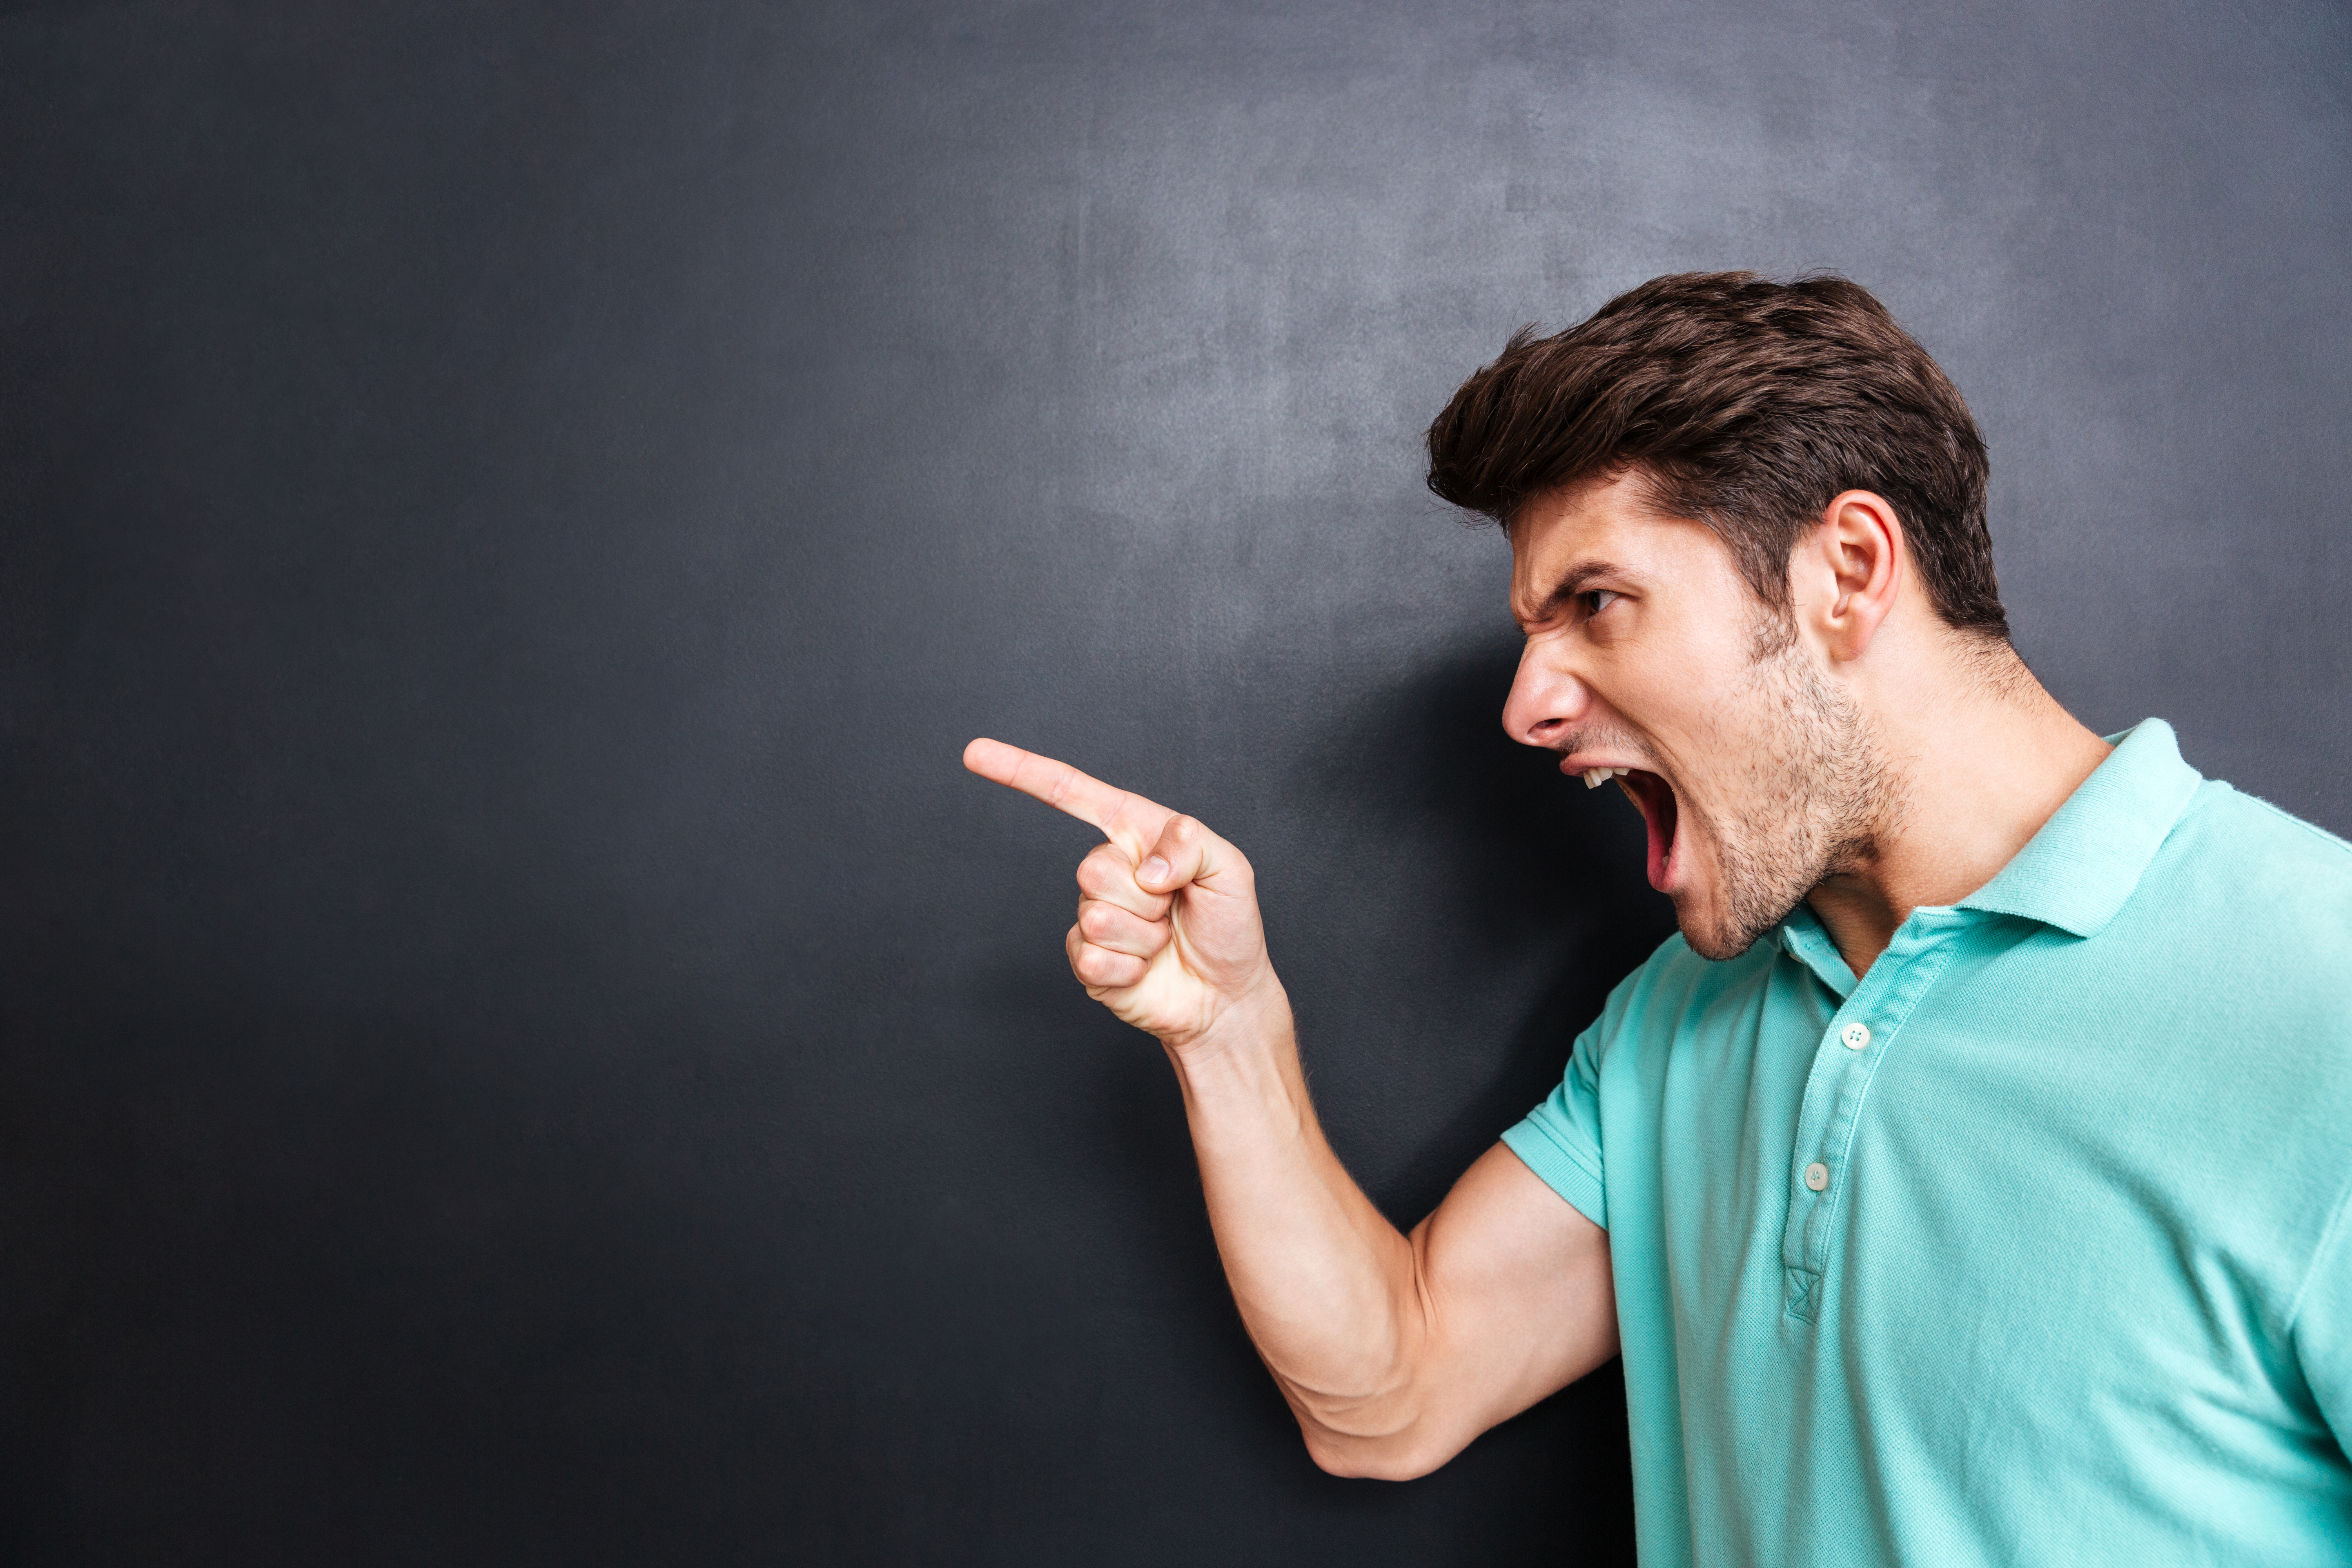 An angry man yelling. | Source: Shutterstock